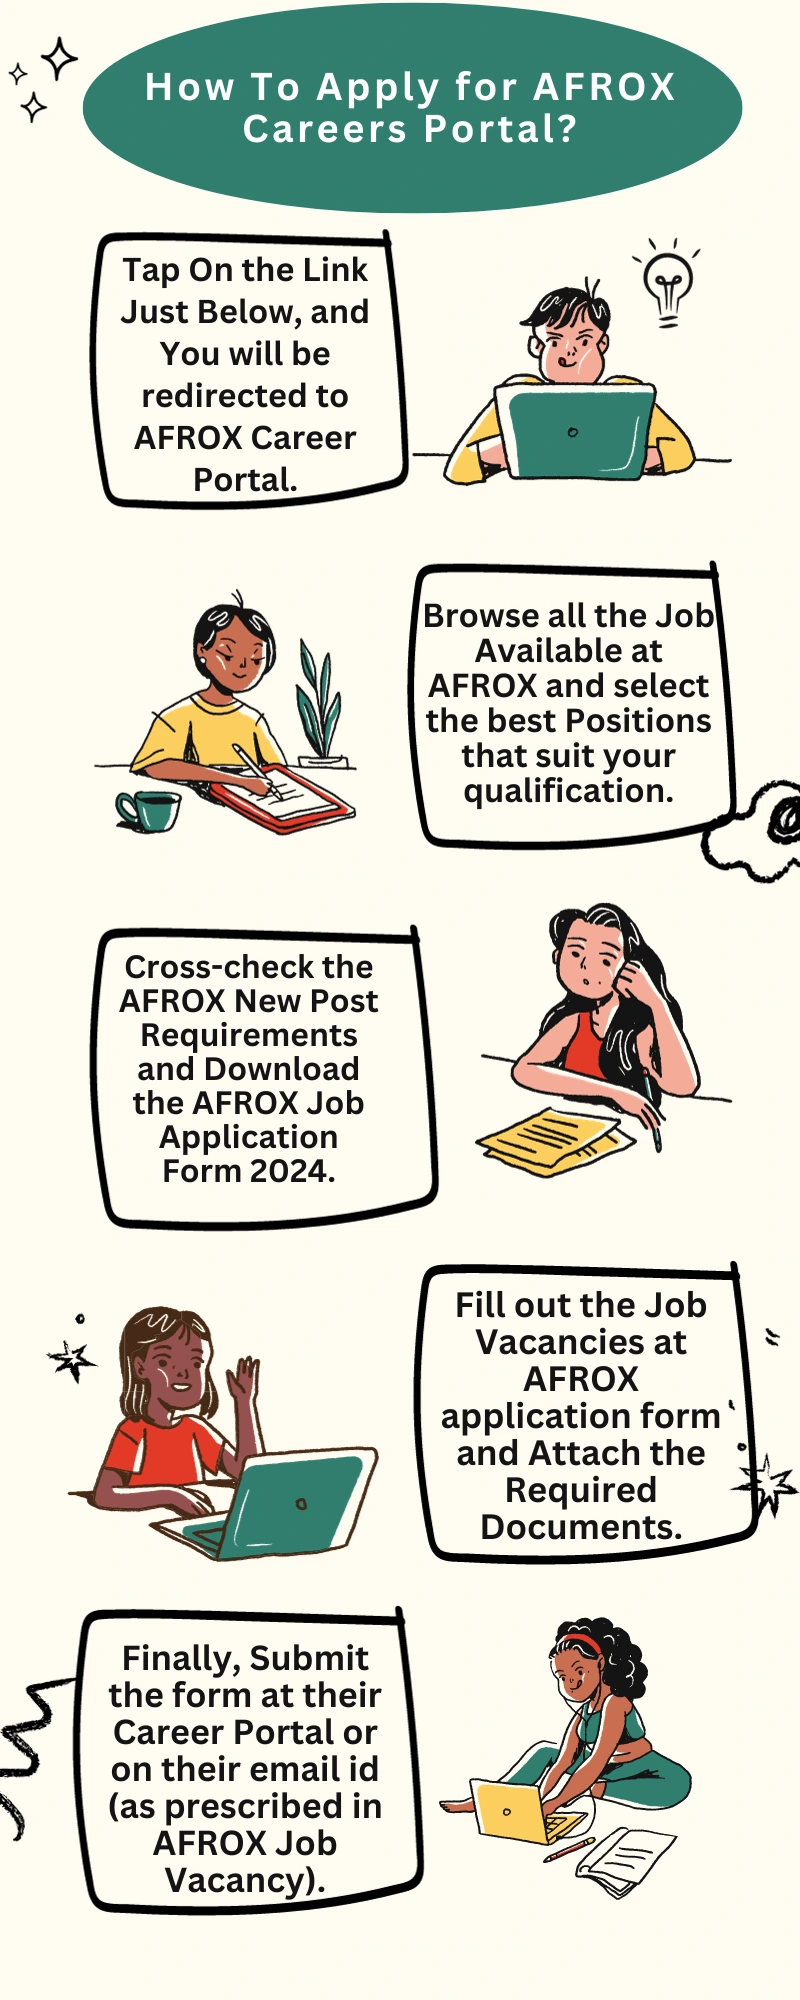 How To Apply for AFROX Careers Portal?